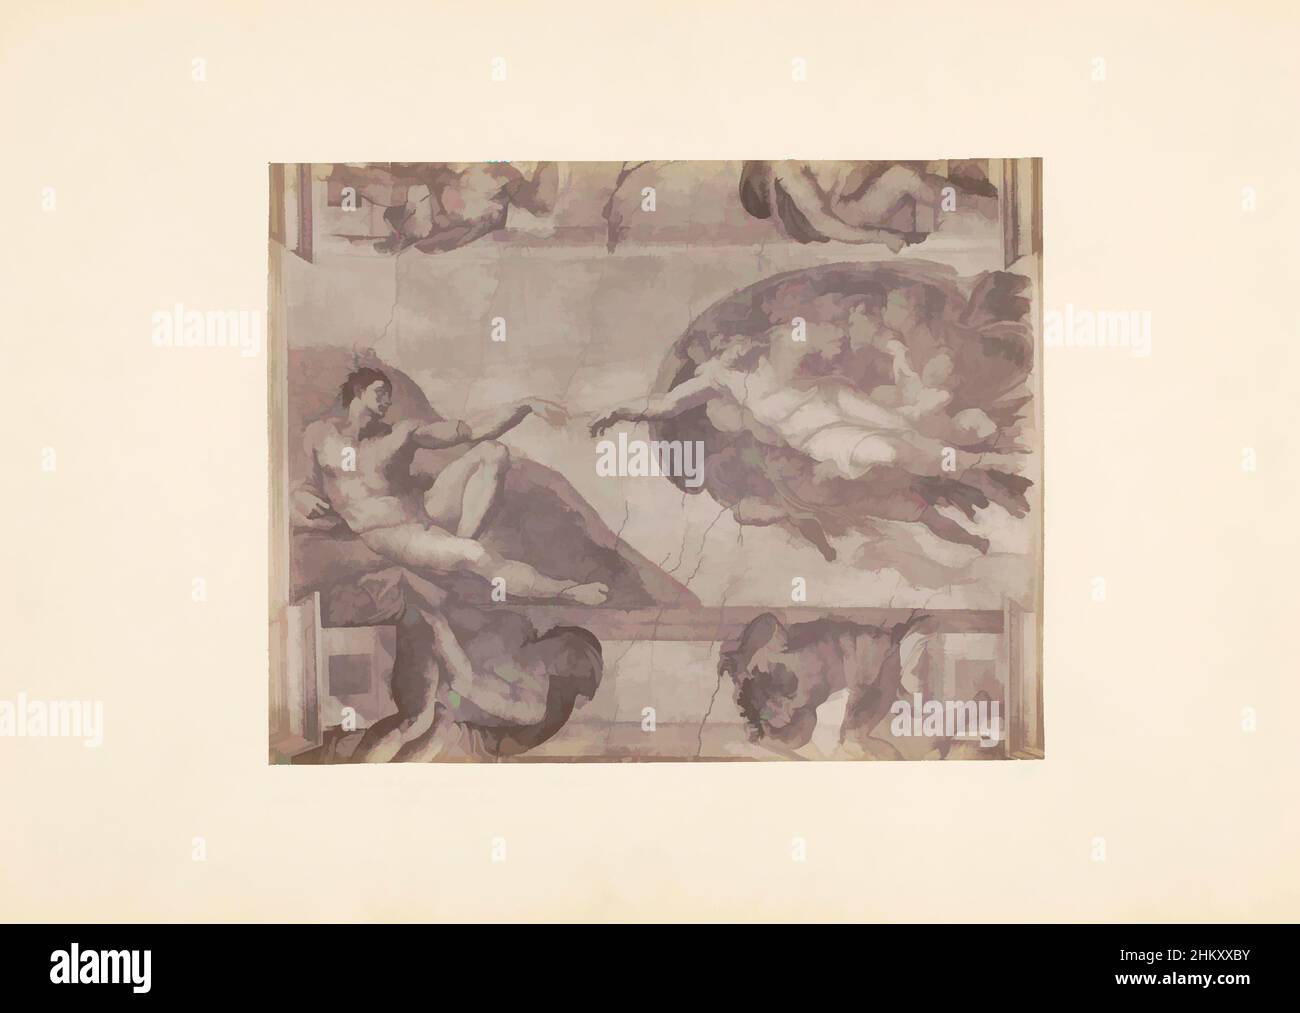 Art inspired by Photoreproduction of the fresco The Creation of Adam, painted by Michelangeo in the Sistine Chapel in Rome, Michelangelo. Rome. Vault of the Sistine Chapel in the Vatican. Middle section: The Creation of Adam., Michelangelo, Sixtijnse kapel (Vaticaan), c. 1875 - c. 1900, Classic works modernized by Artotop with a splash of modernity. Shapes, color and value, eye-catching visual impact on art. Emotions through freedom of artworks in a contemporary way. A timeless message pursuing a wildly creative new direction. Artists turning to the digital medium and creating the Artotop NFT Stock Photo